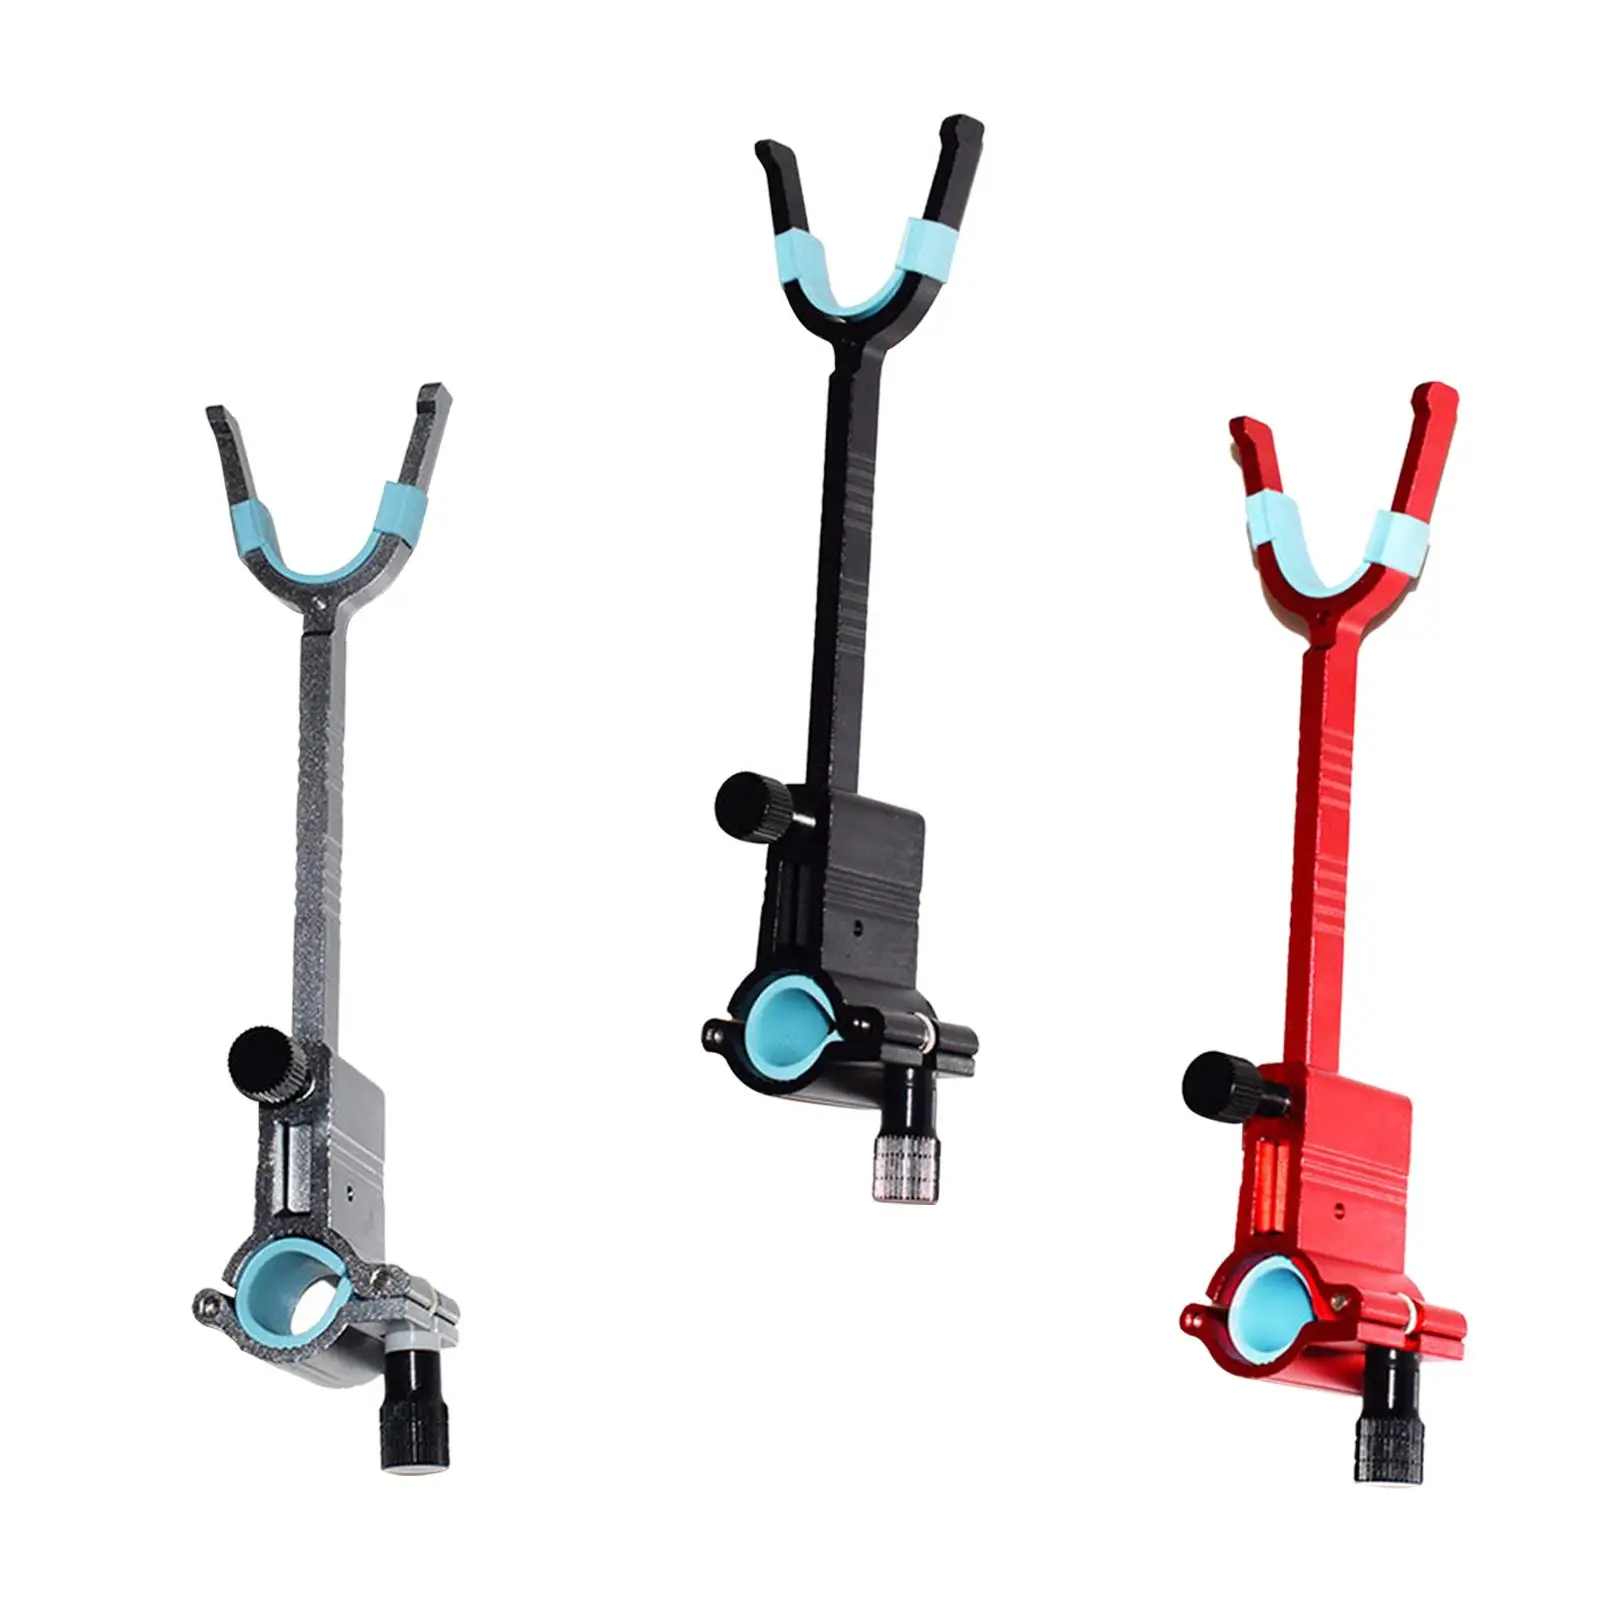 Rod Holders for Bank Fishing Metal for Fishing Rod 20-27mm Adjustable Fishing Rod Rack for Boat Outdoor Fishing Tackle